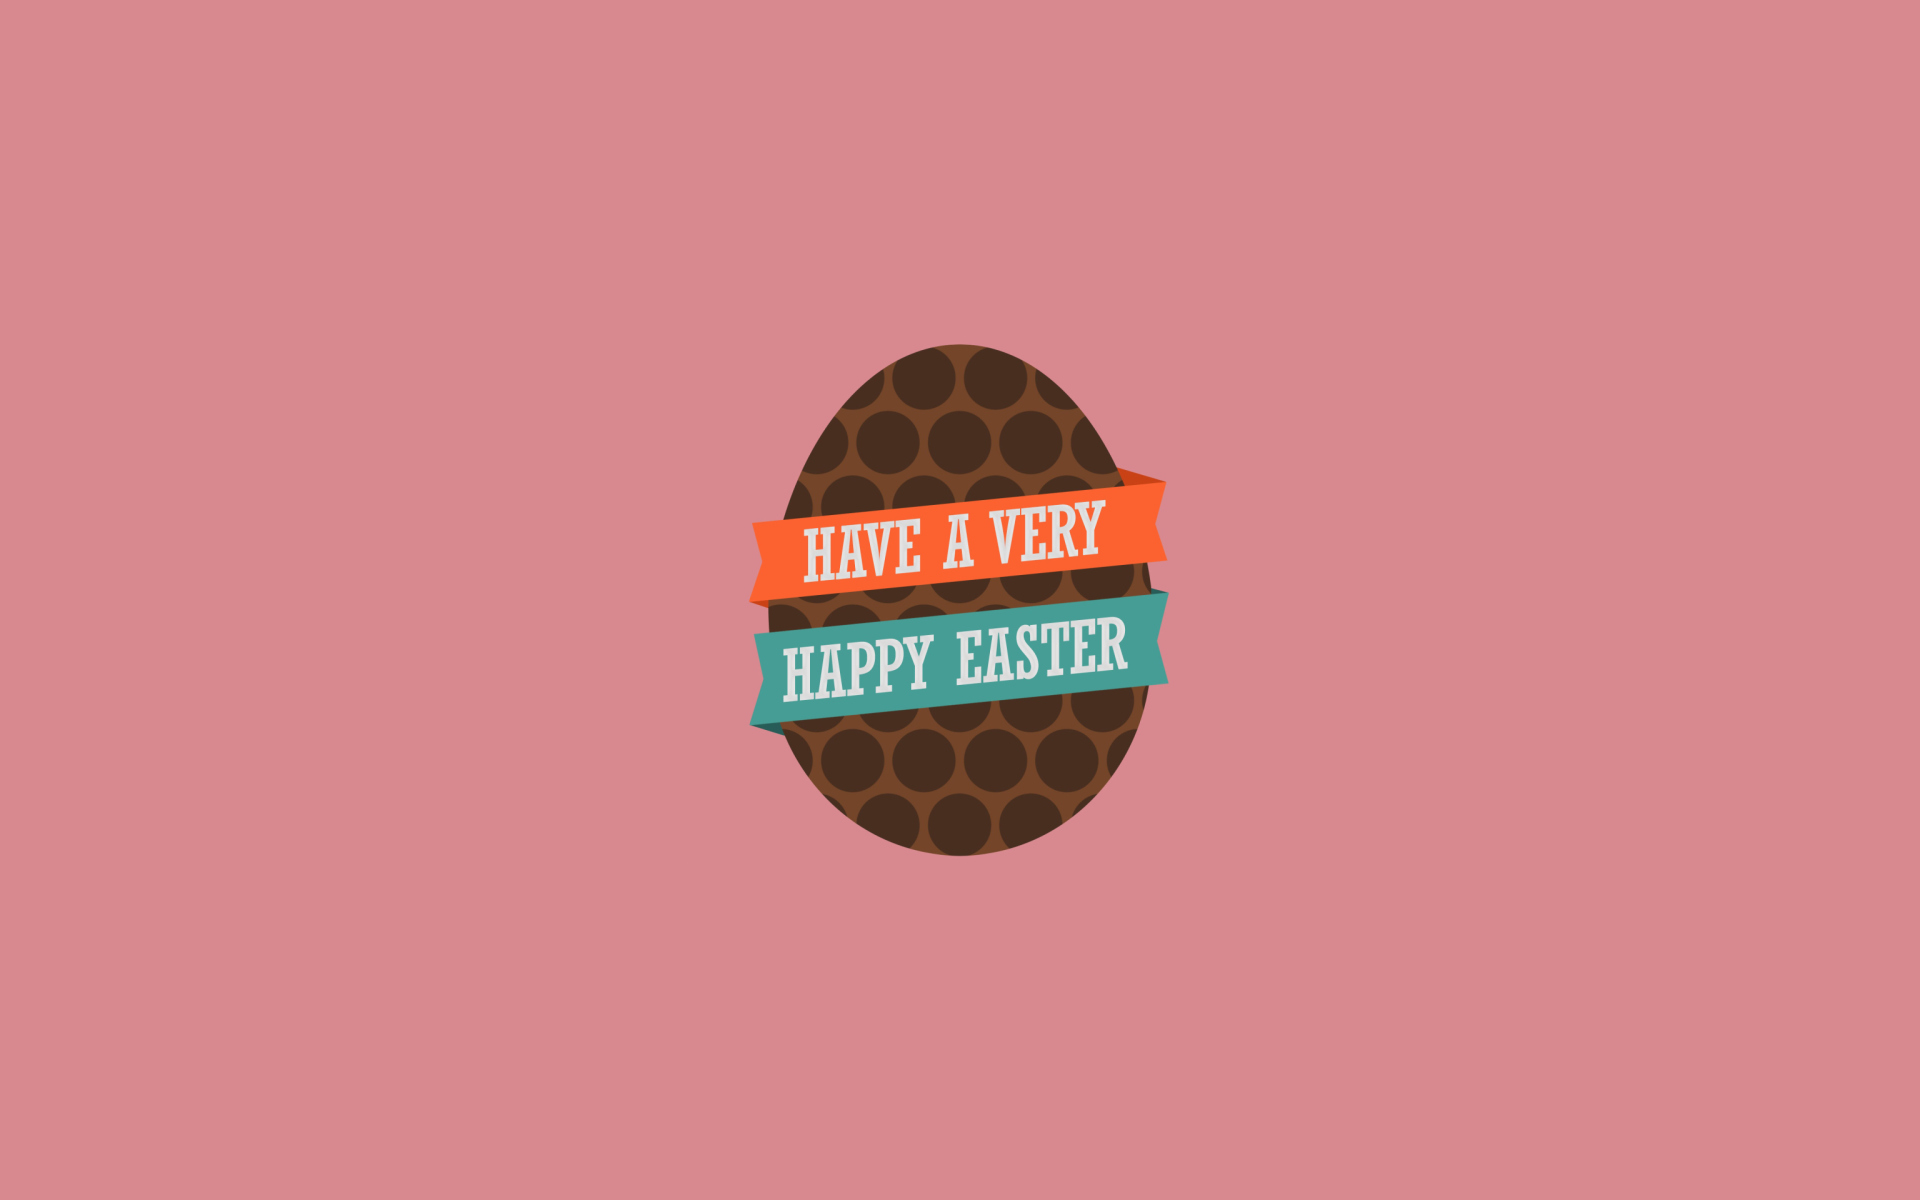 Very Happy Easter Egg wallpaper 1920x1200